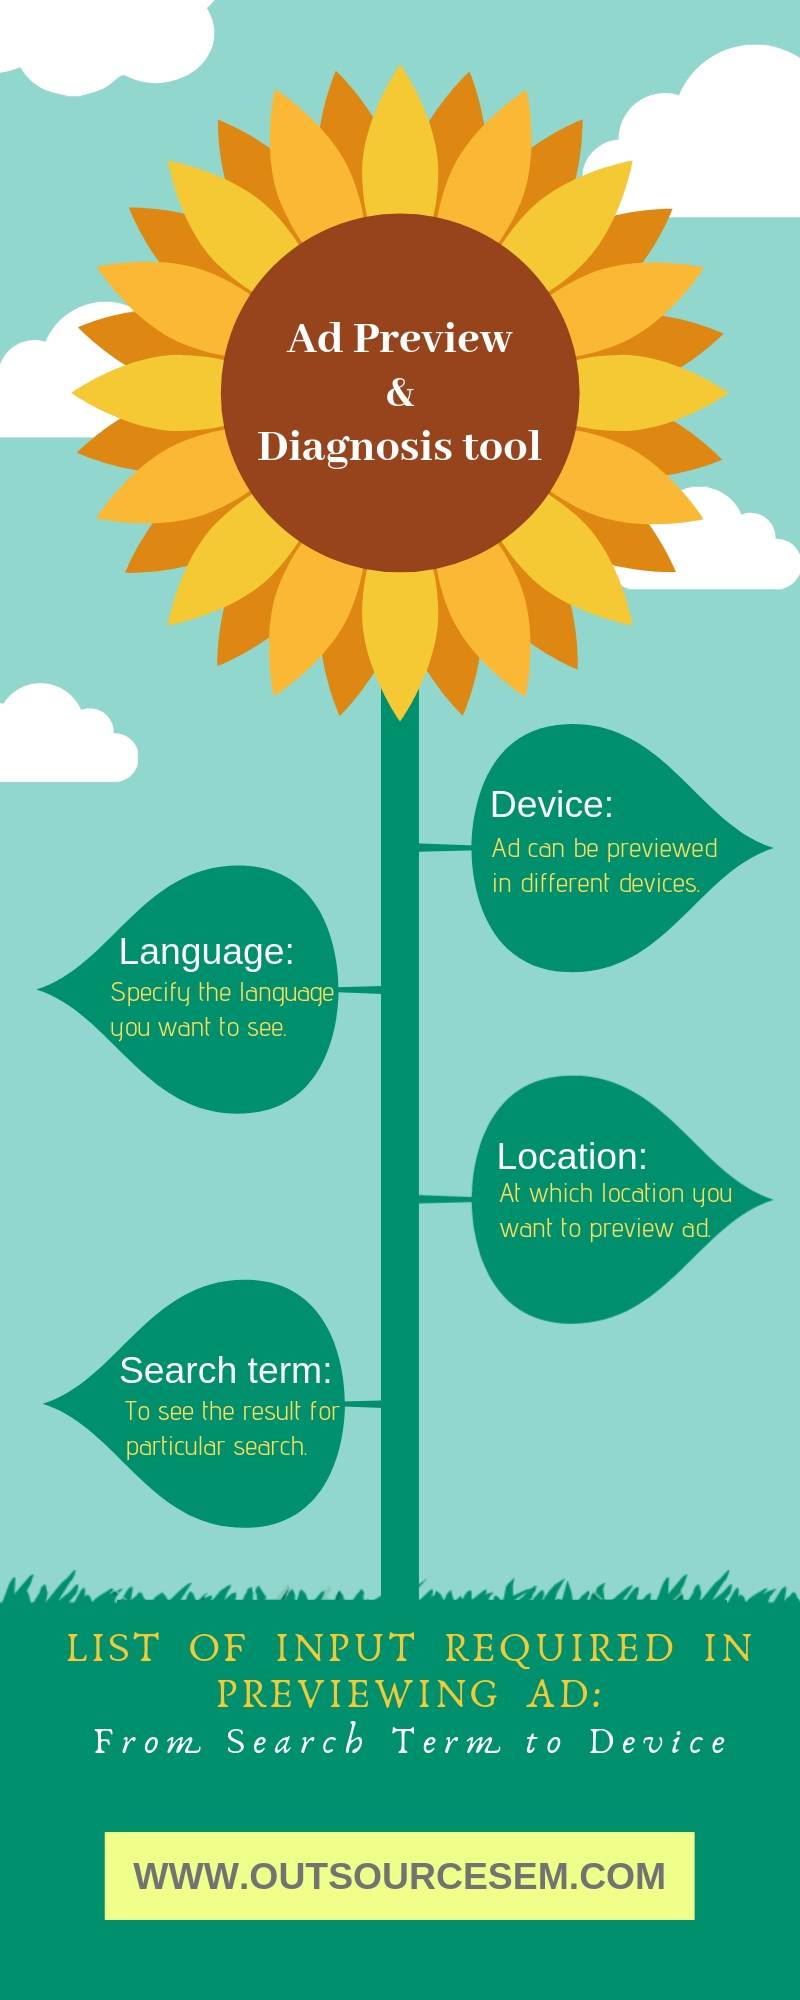 google ad preview dignosis tool infographic